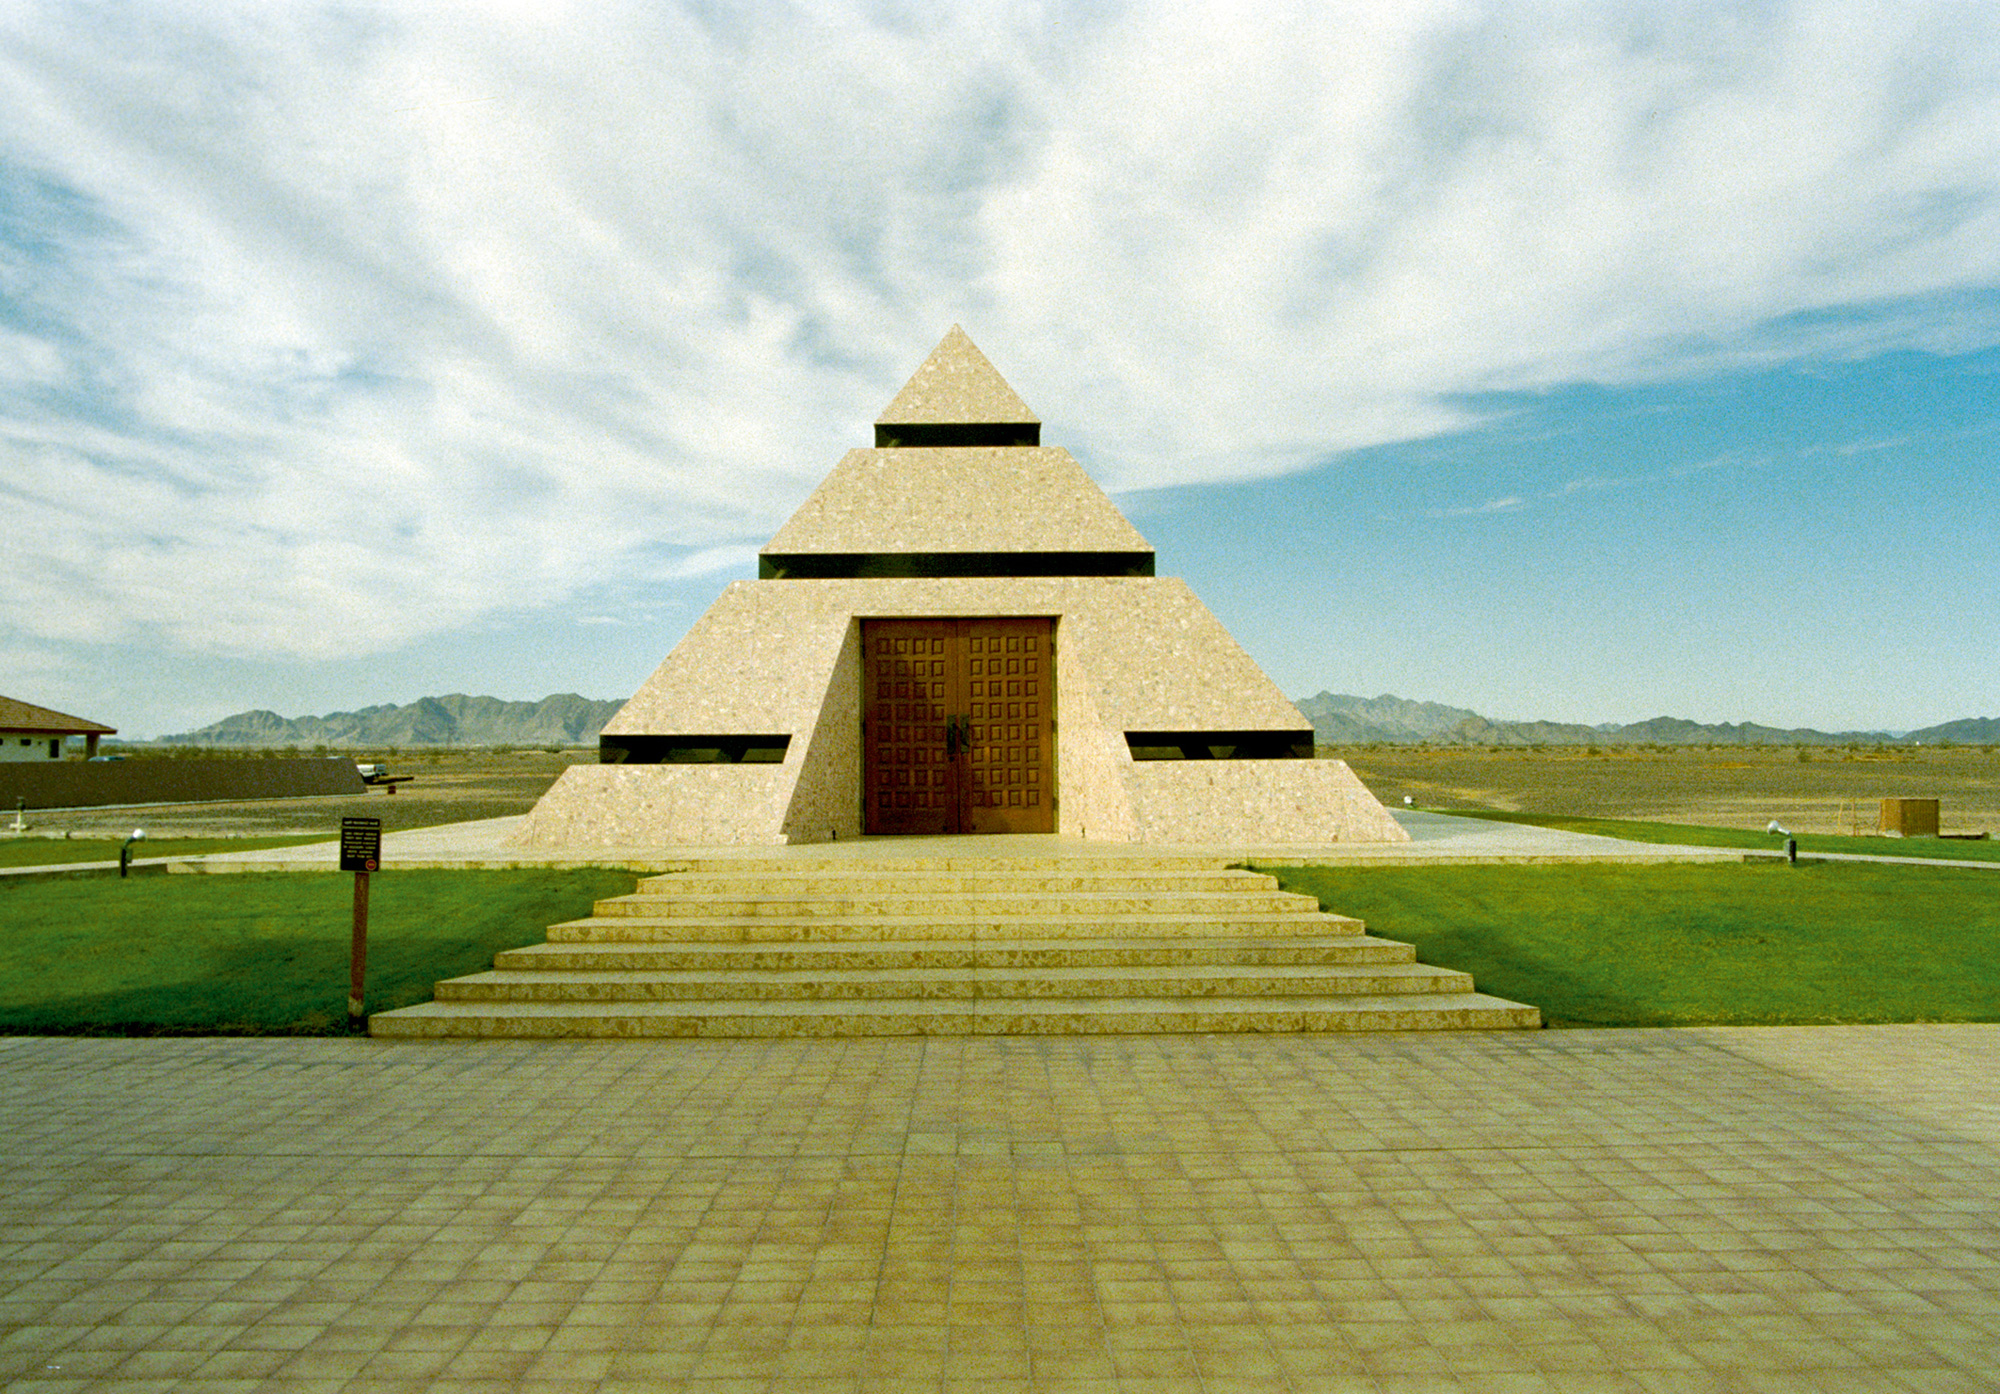 A pyramid at Felicity, also known as the Center of the World.